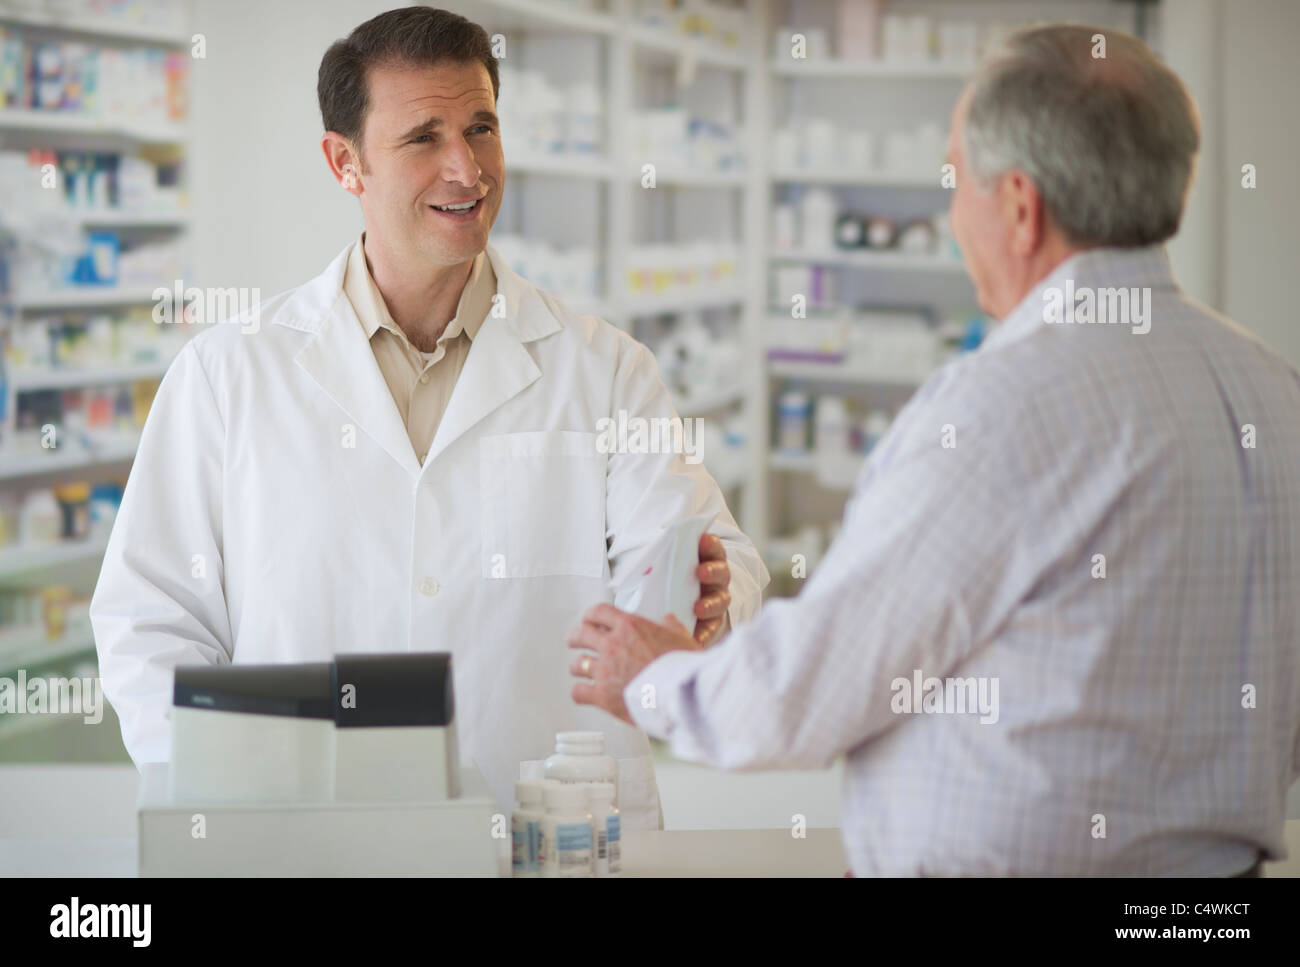 USA,New Jersey,Jersey City,Pharmacist explaining use of medicine to patient Stock Photo